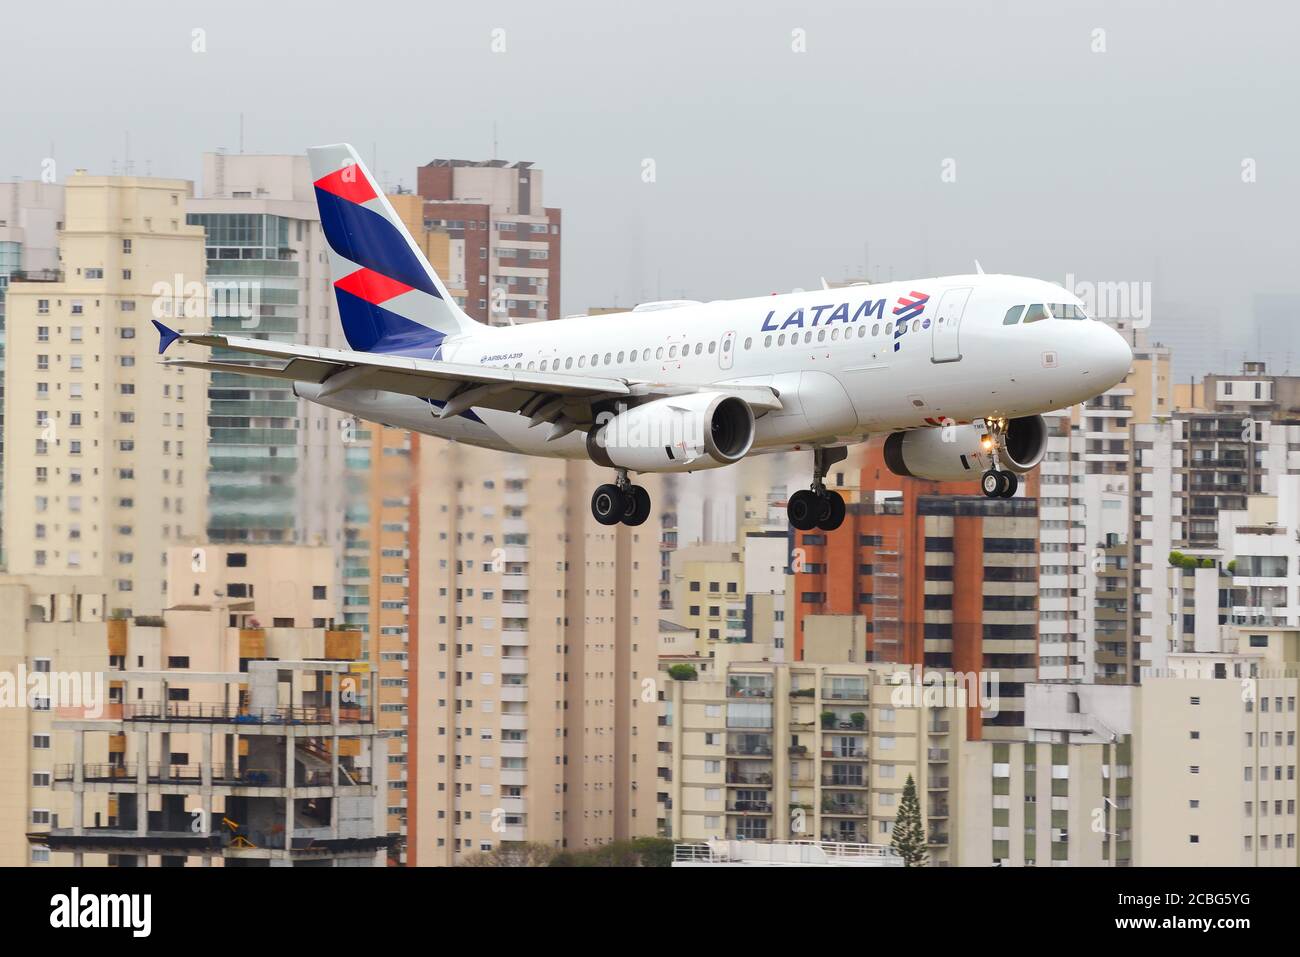 LATAM Airlines Airbus A319 on final approach to Sao Paulo Congonhas Airport in Brazil. Small aircraft landing in Brazilian central airport. Stock Photo